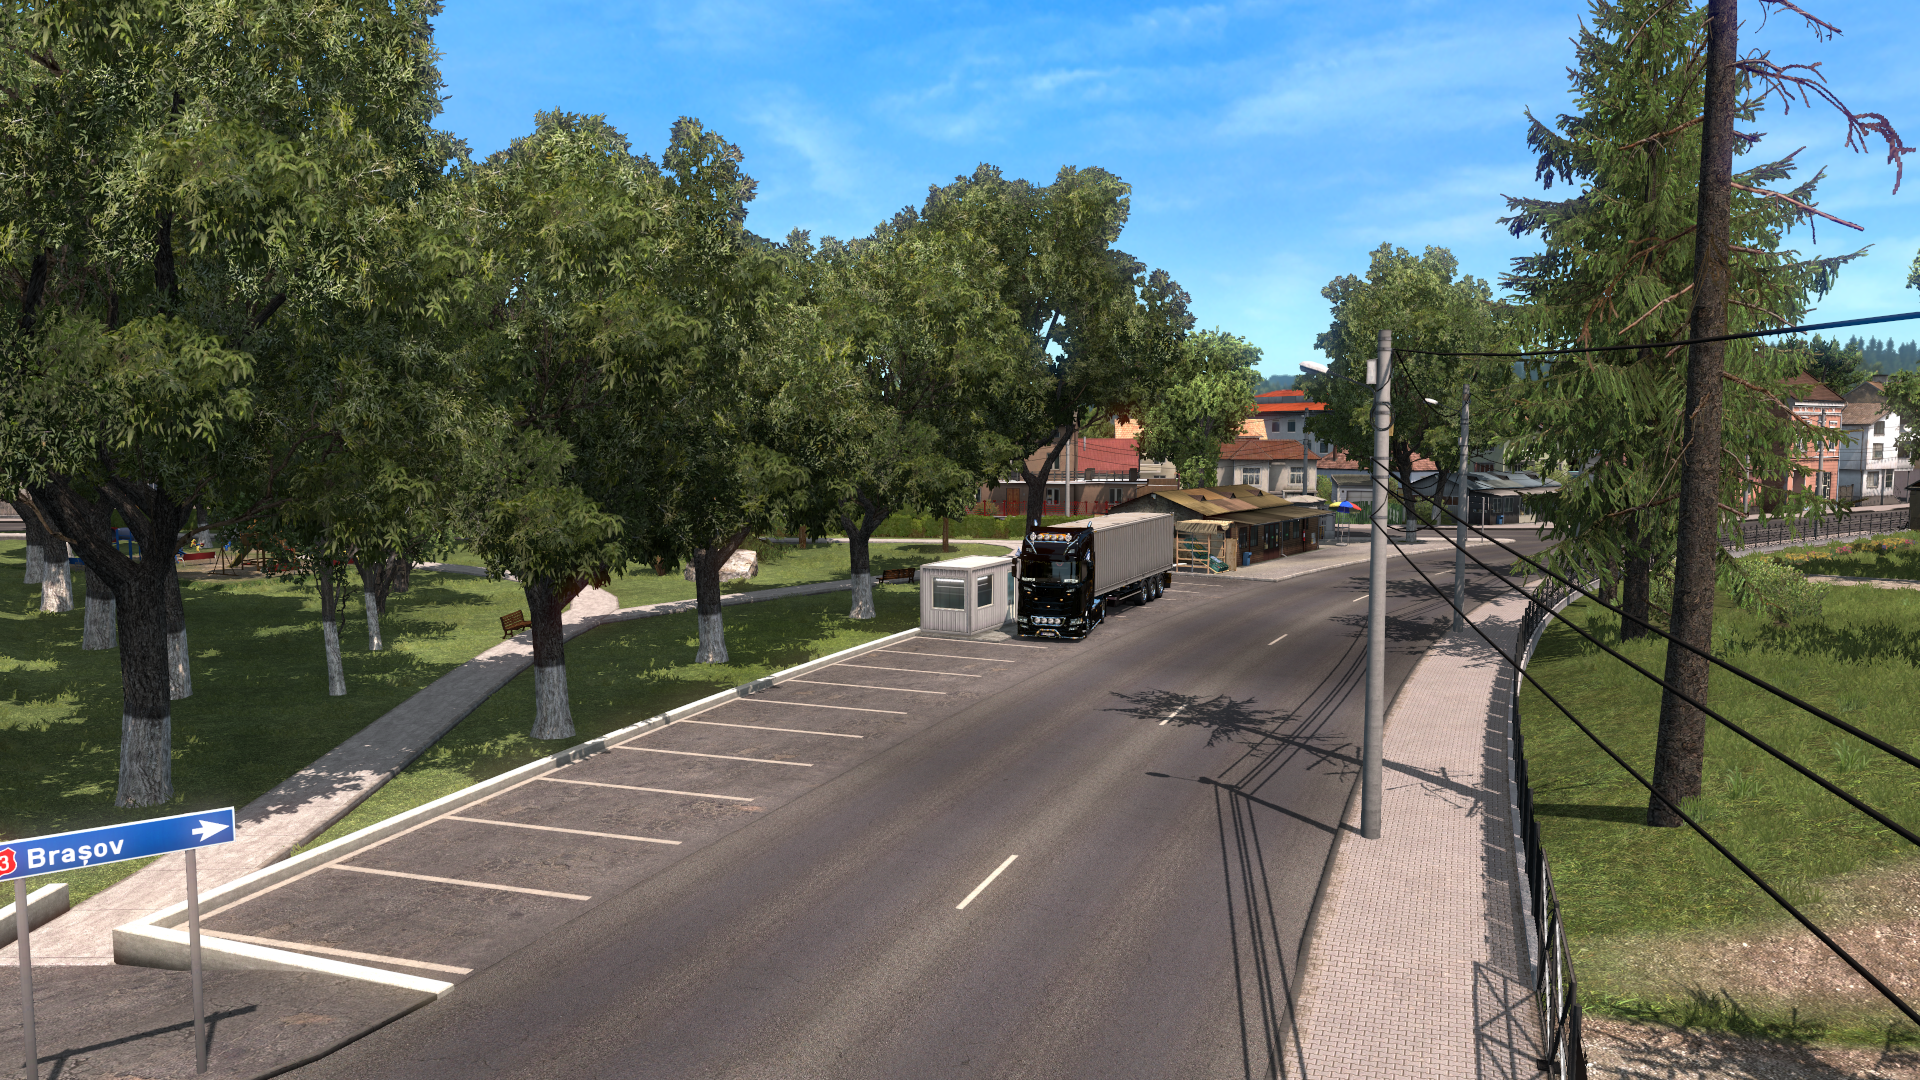 ets2_20200315_121353_00.png